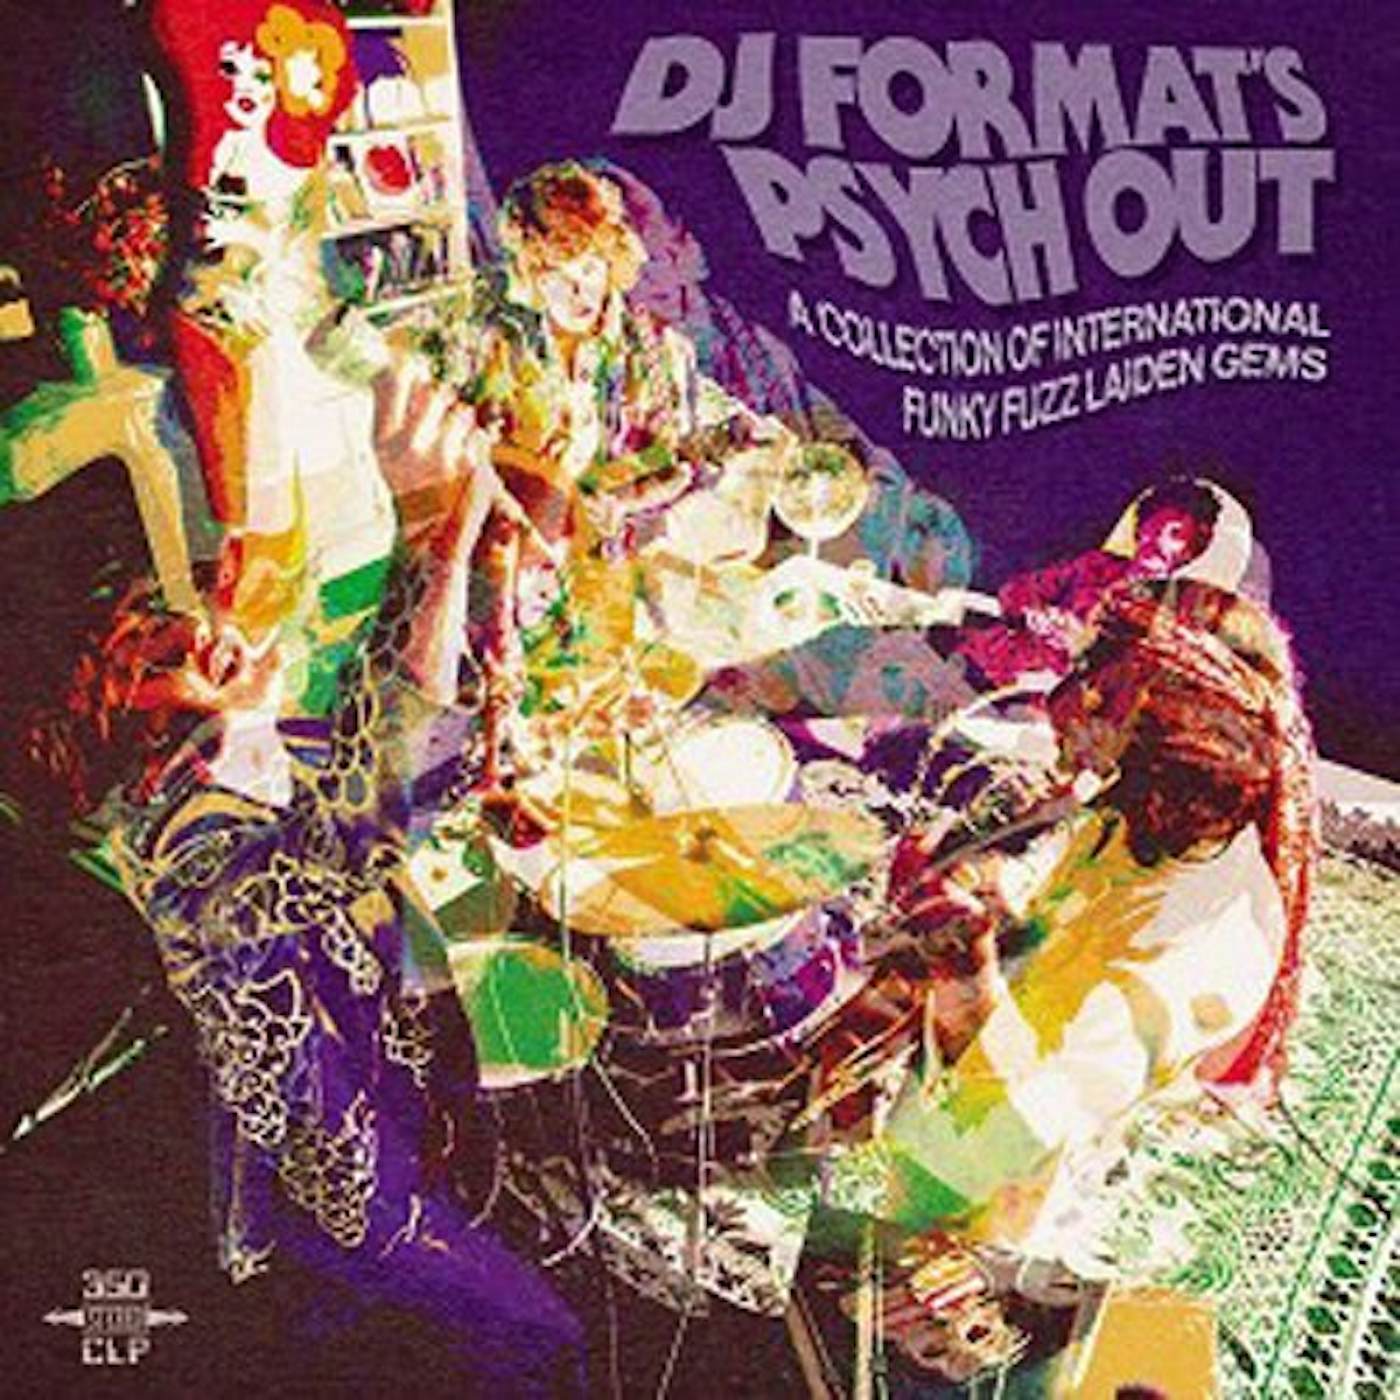 DJ FORMAT'S PSYCH OUT Vinyl Record